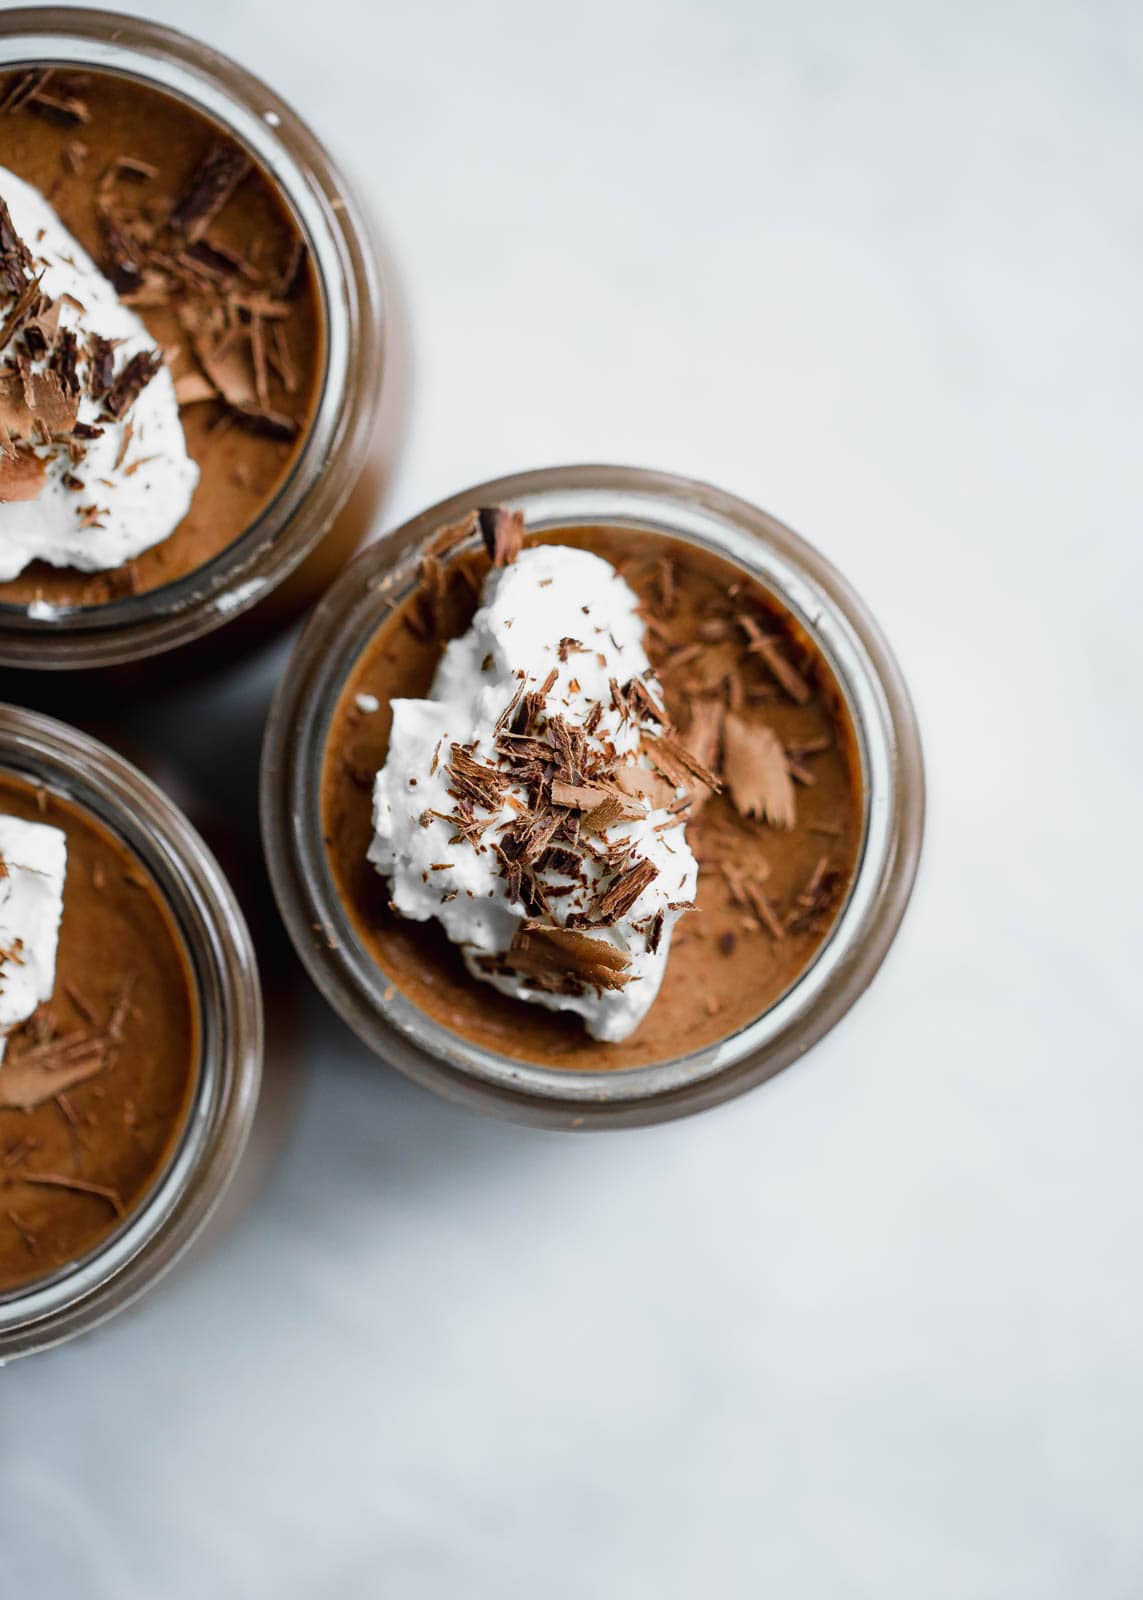 Chocolate Mousse in jars on counter